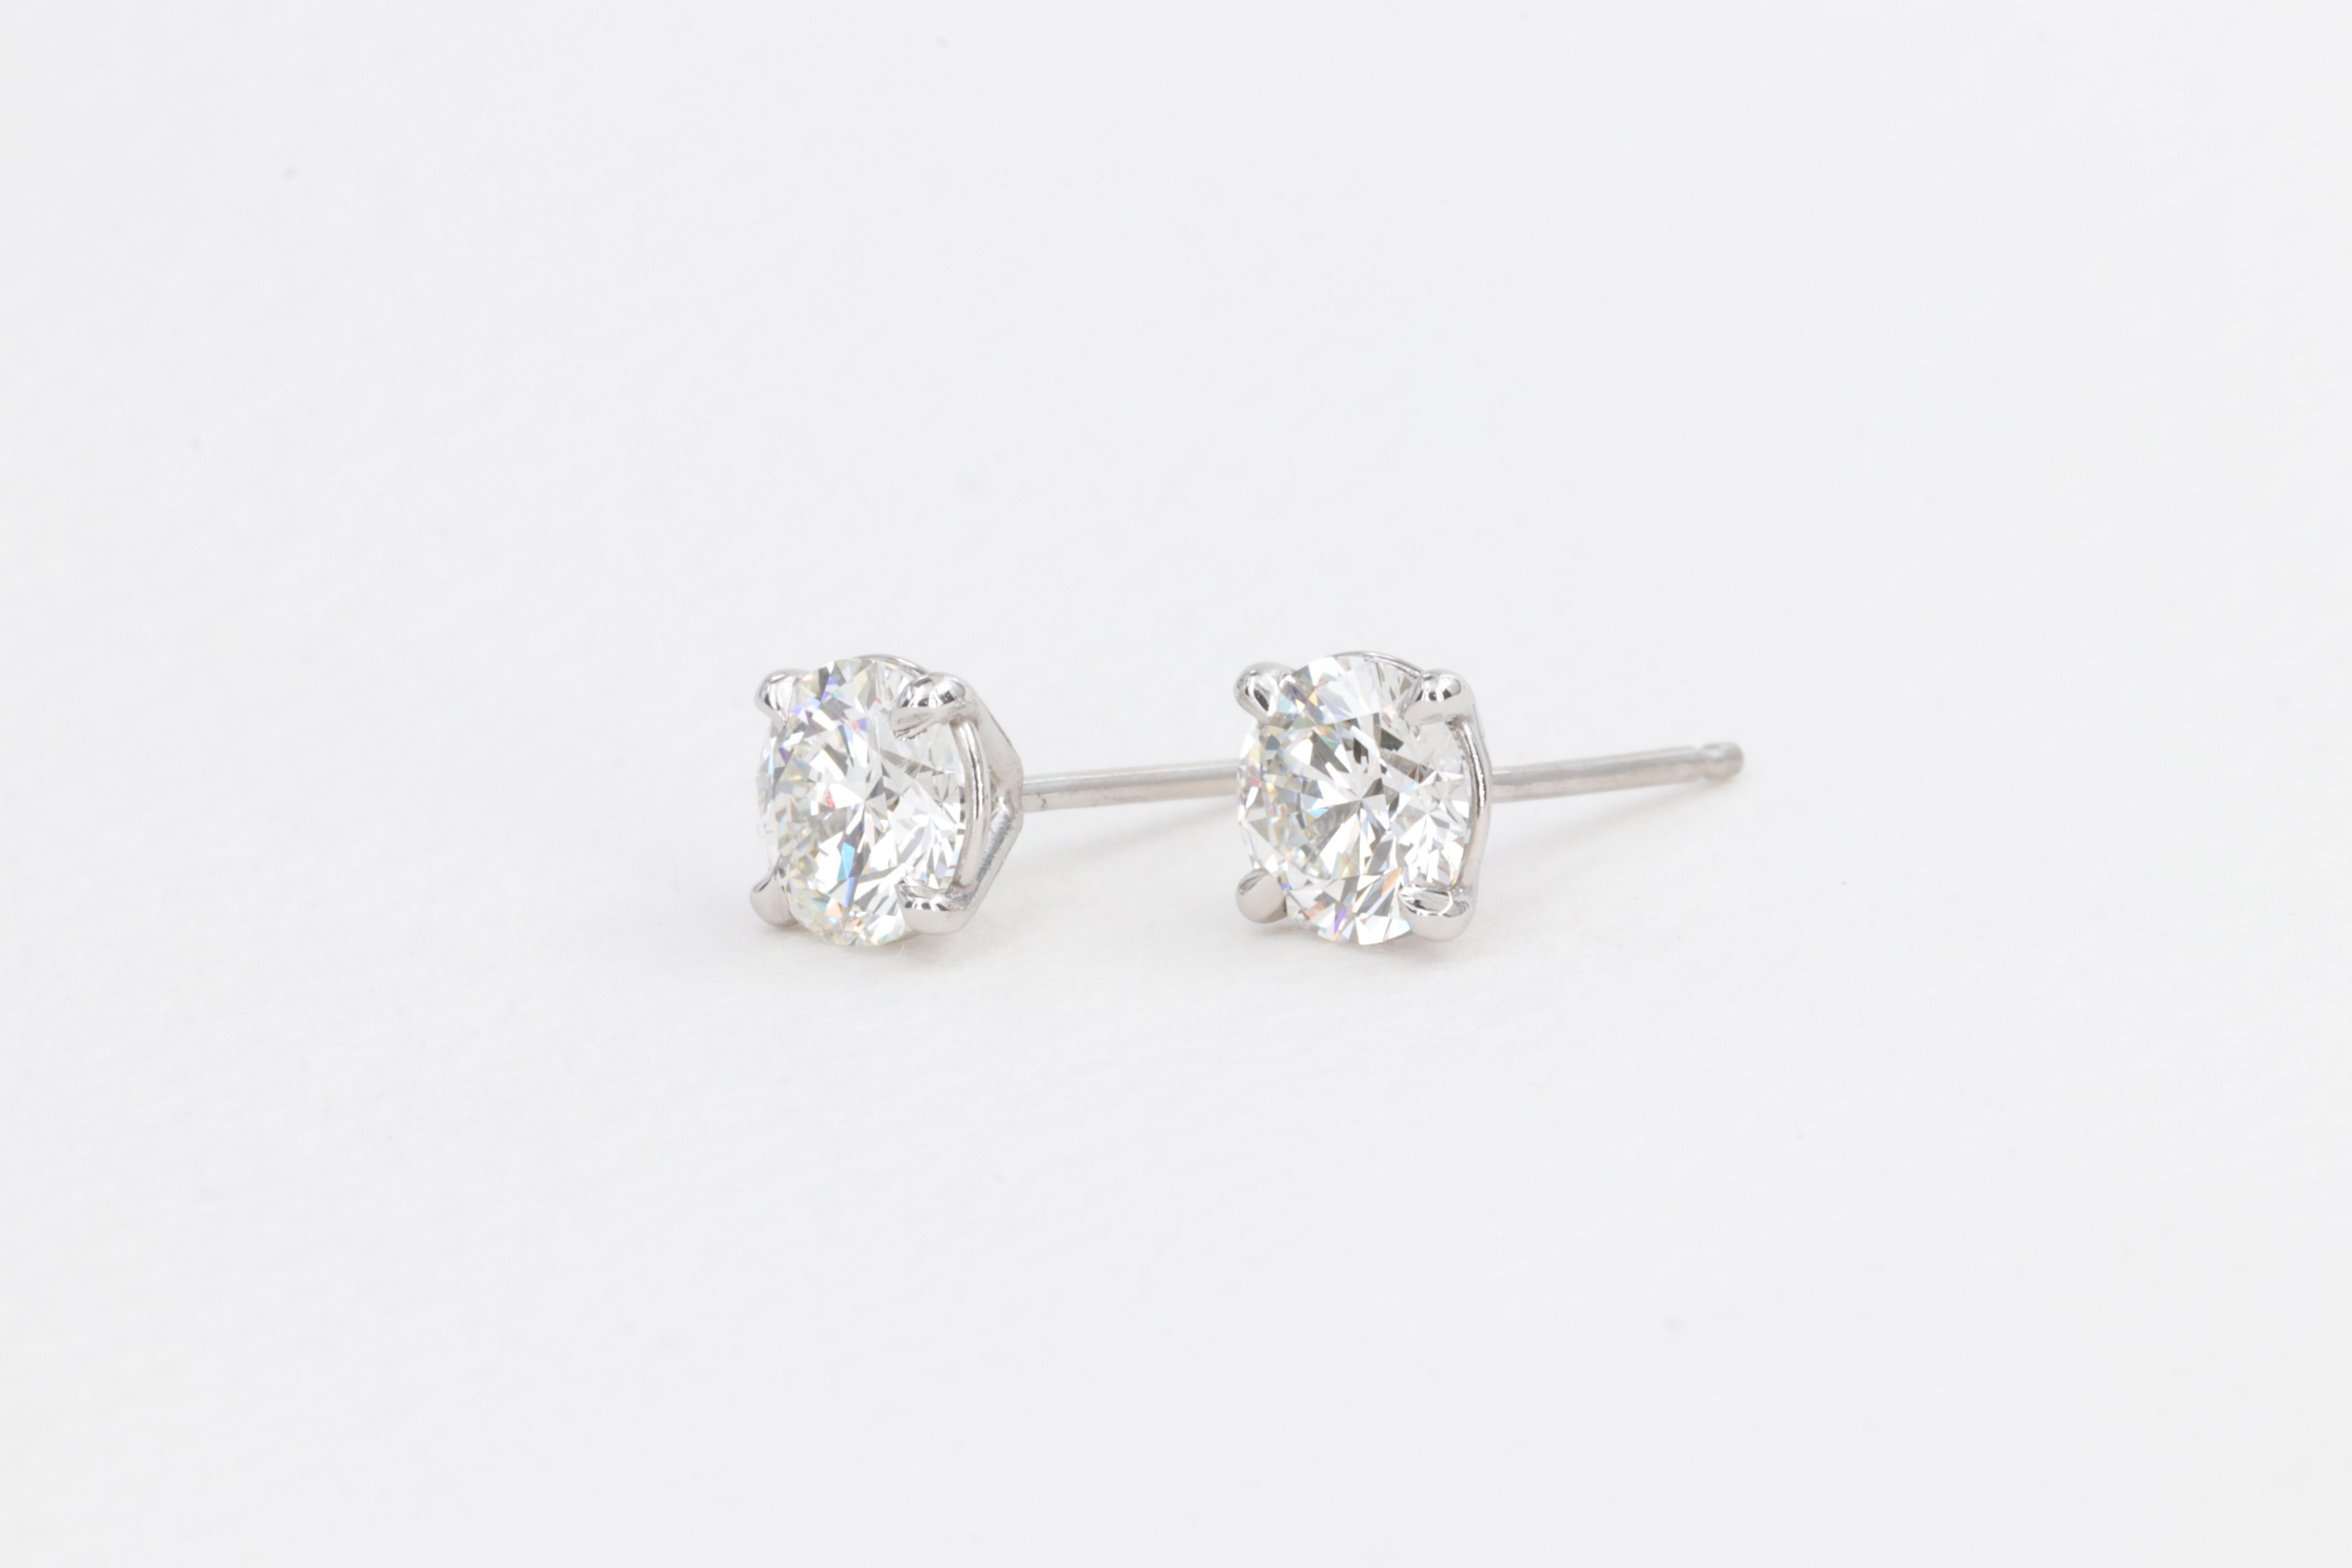 Forevermark Diamond Stud Earrings 1.40 Carats H Color VVS2 Clarity in Platinum In Excellent Condition For Sale In Tampa, FL